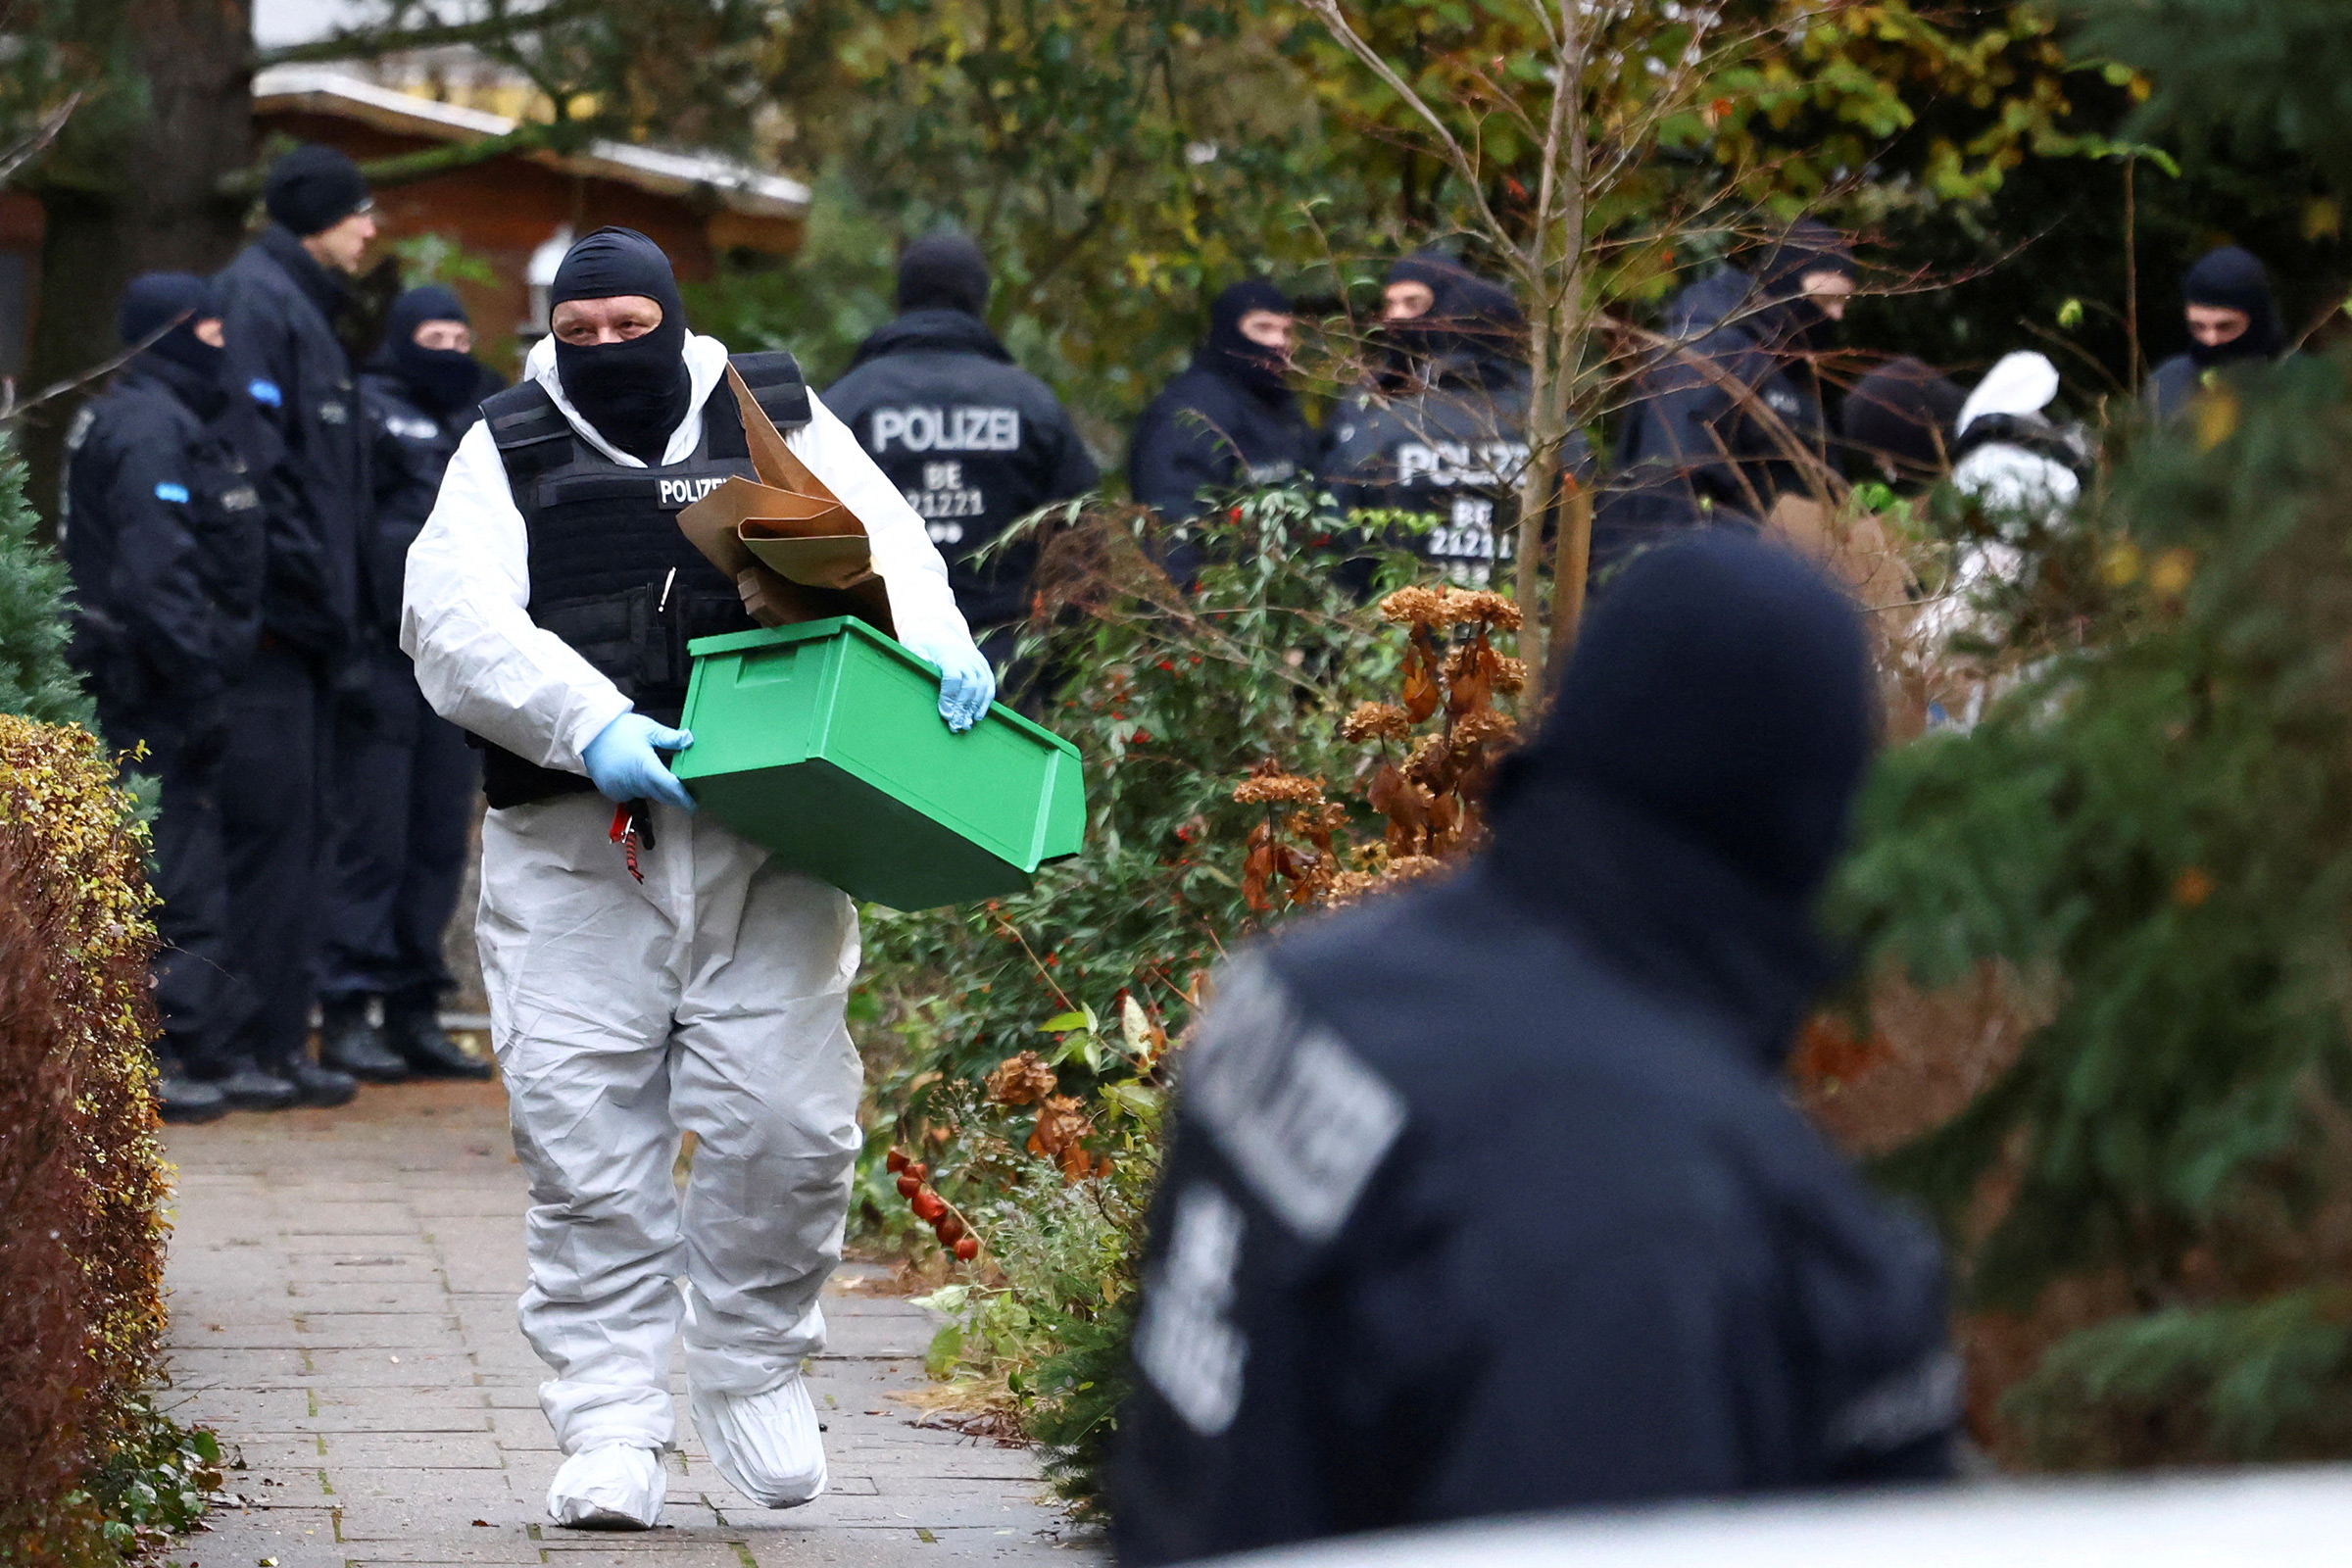 Police secure an area in Berlin after 25 suspected members and supporters of a far-right group were detained during raids across Germany, Dec. 7, 2022.